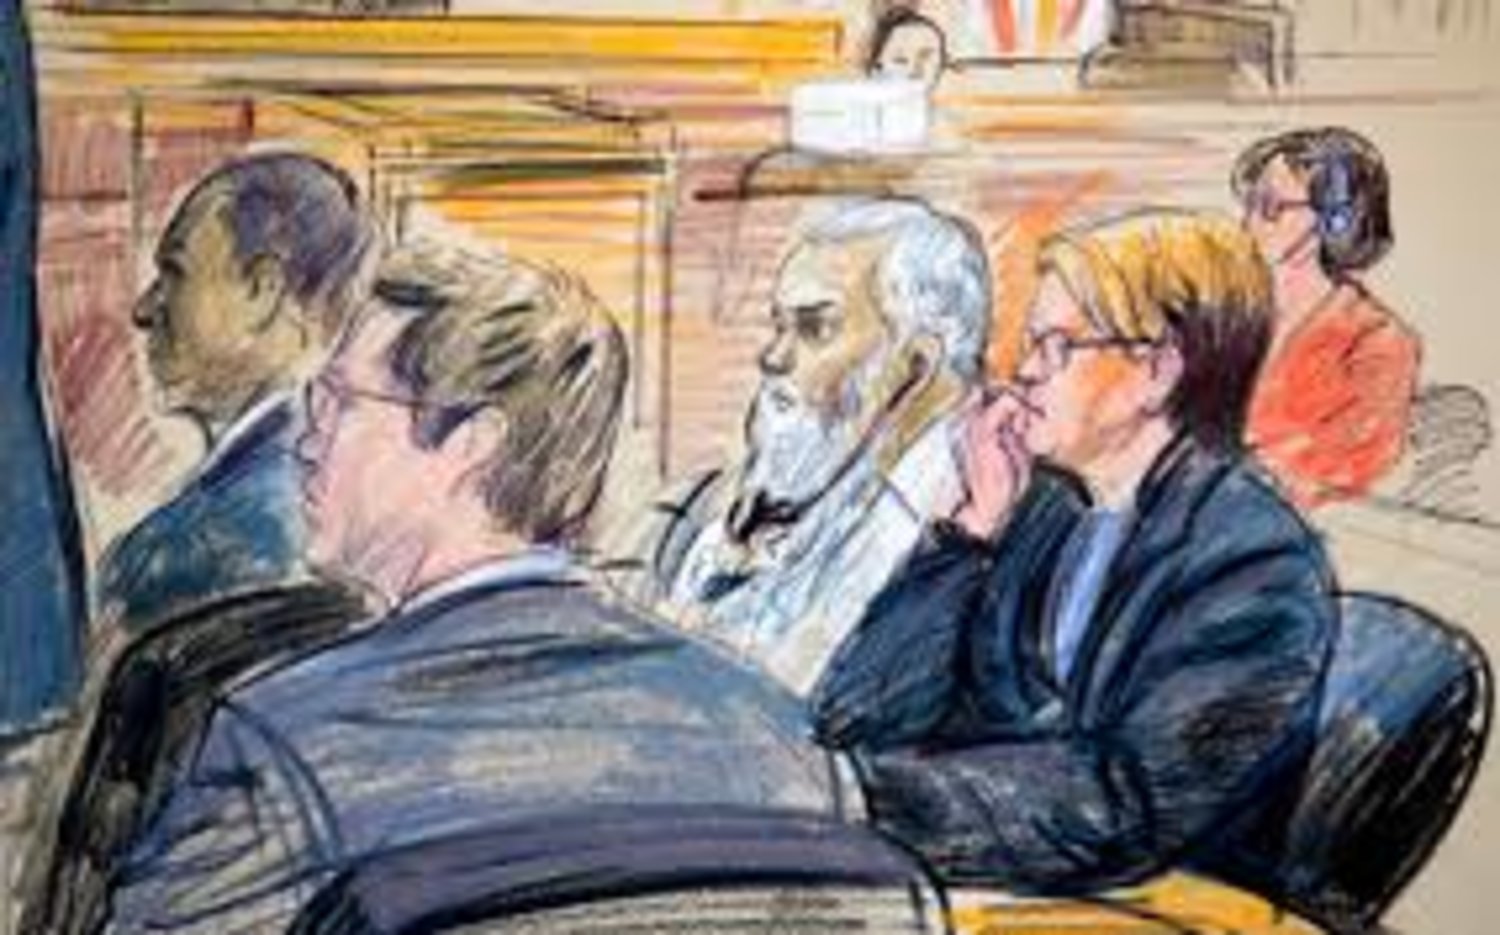 On trial for the 2012 Benghazi attacks on US facilities in Libya, Ahmed Abu Khattala is shown in a courtroom sketch listening to a translation of an opening statement Oct. 2. (Dana Verkouteren/AP) 